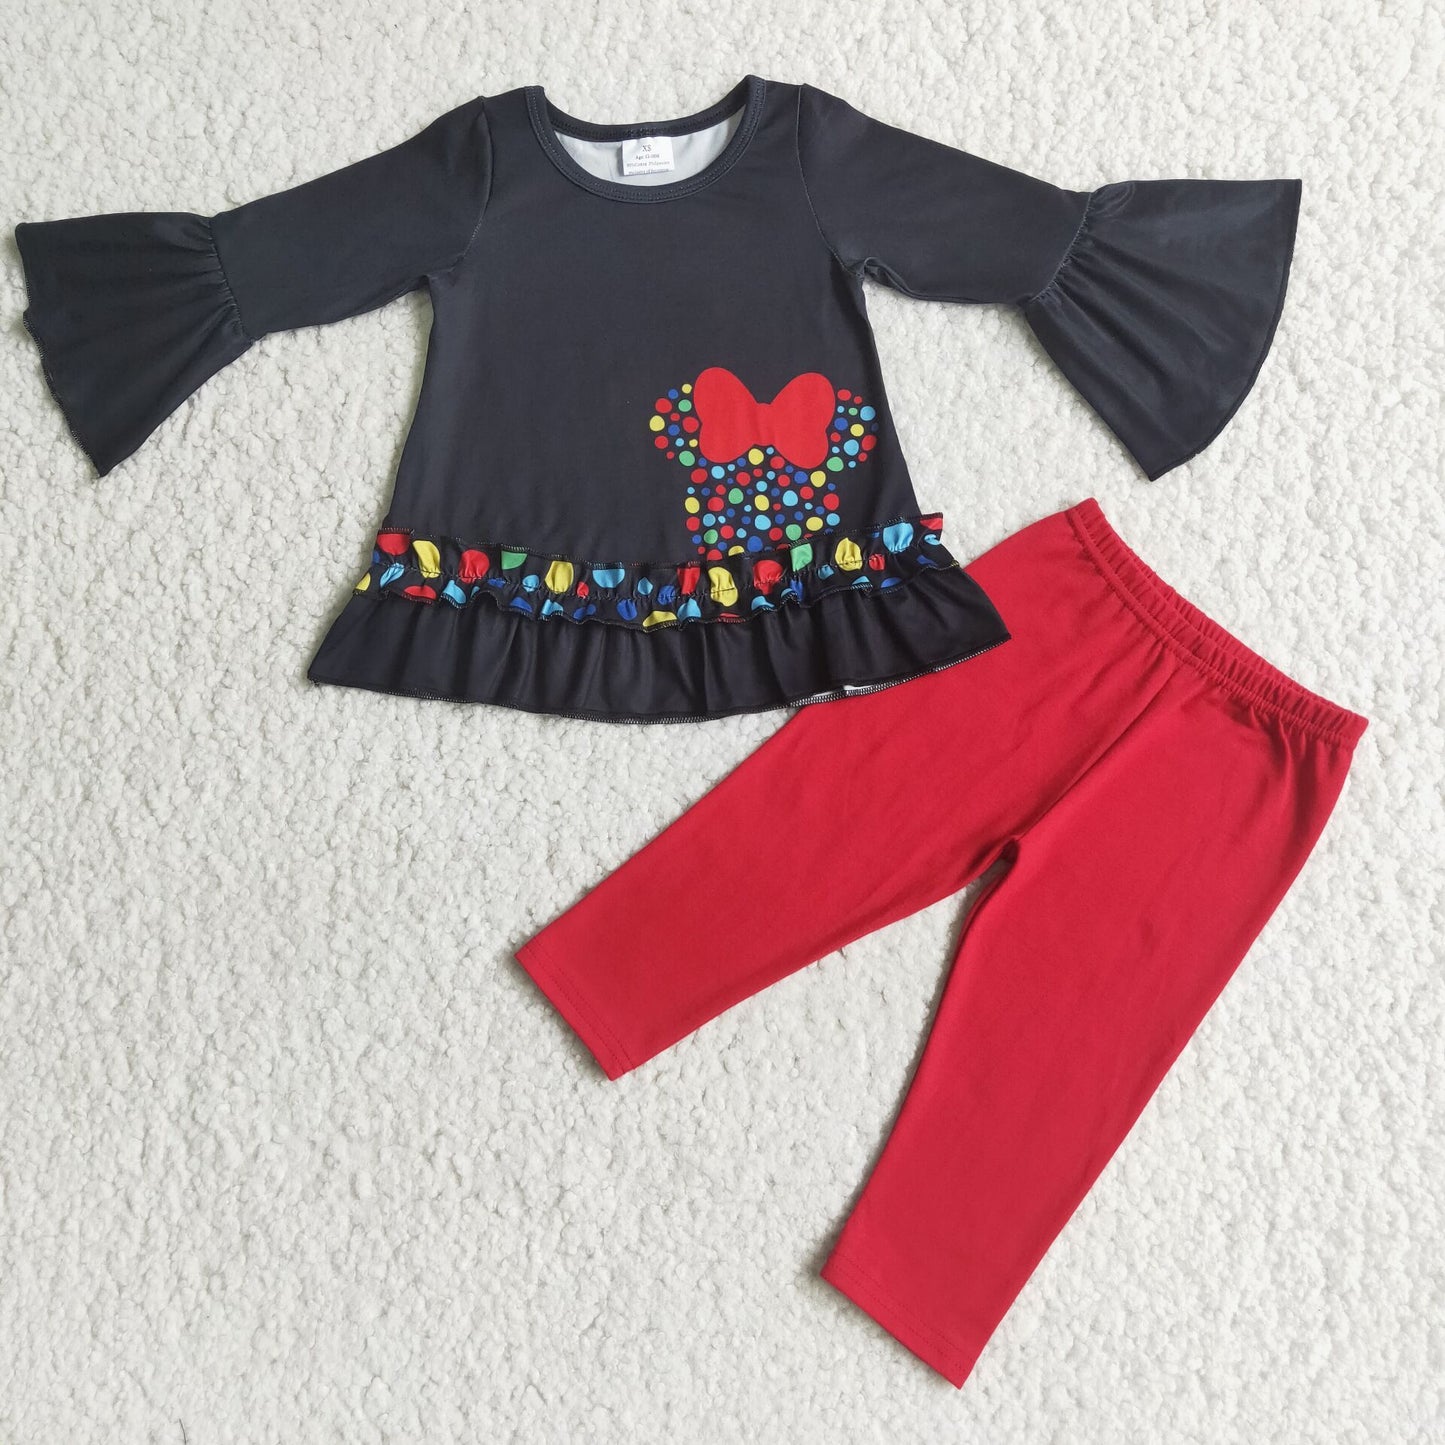 Cute Legging Pants Outfit for Christmas